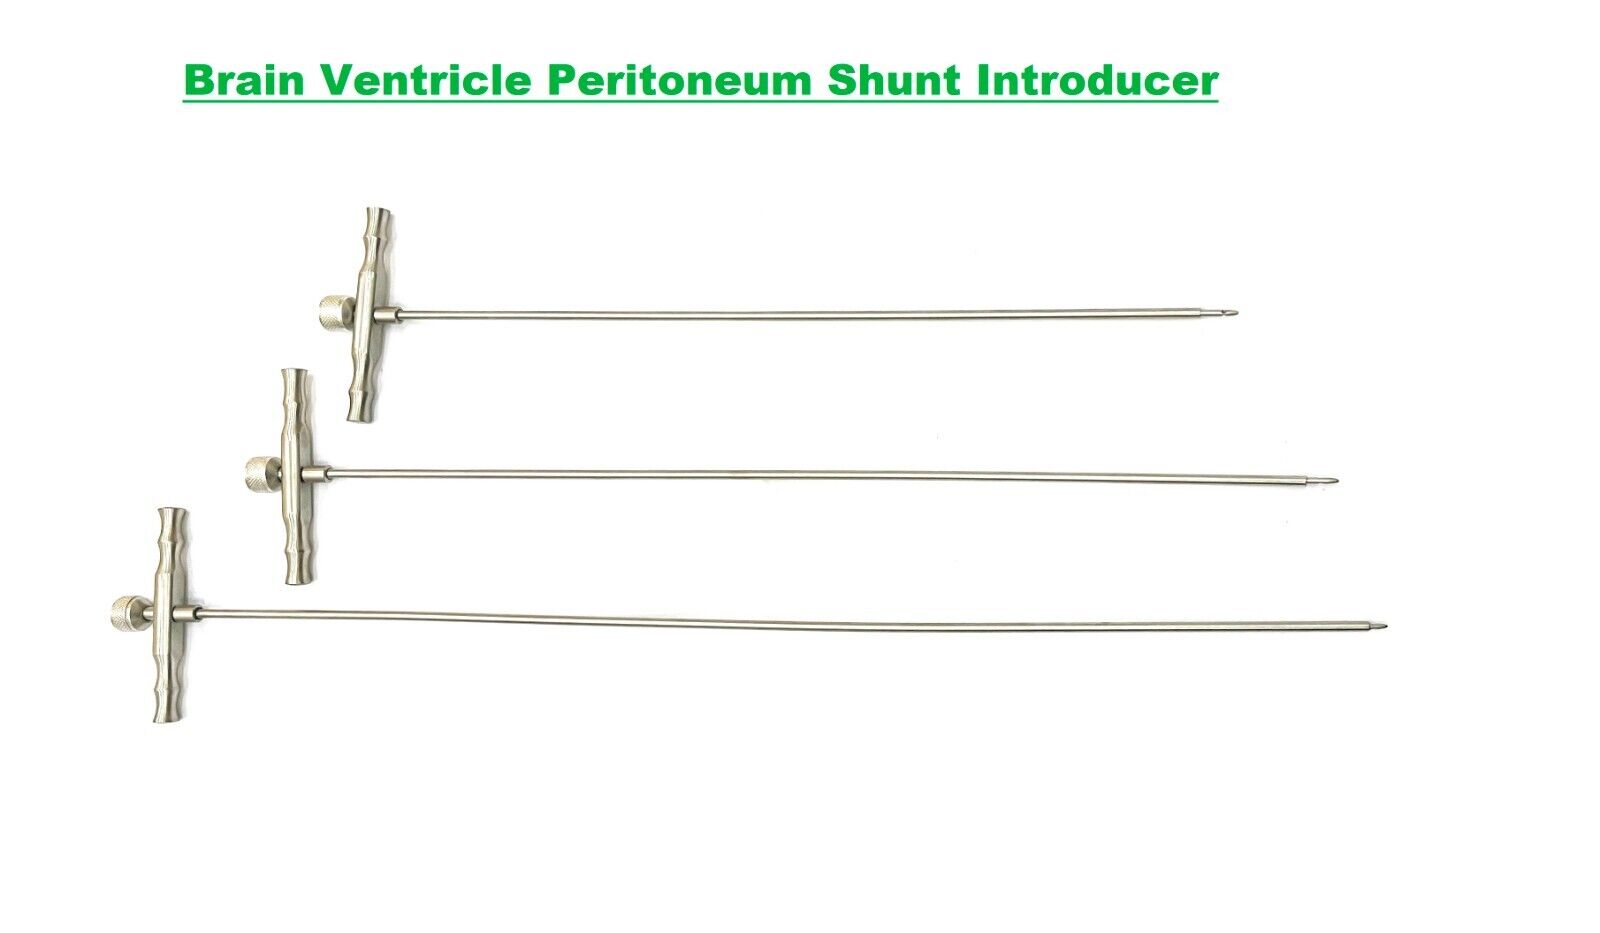 Brain Ventricle Peritoneum Shunt Introducer For Neurosurgery Instrument Set Of 3